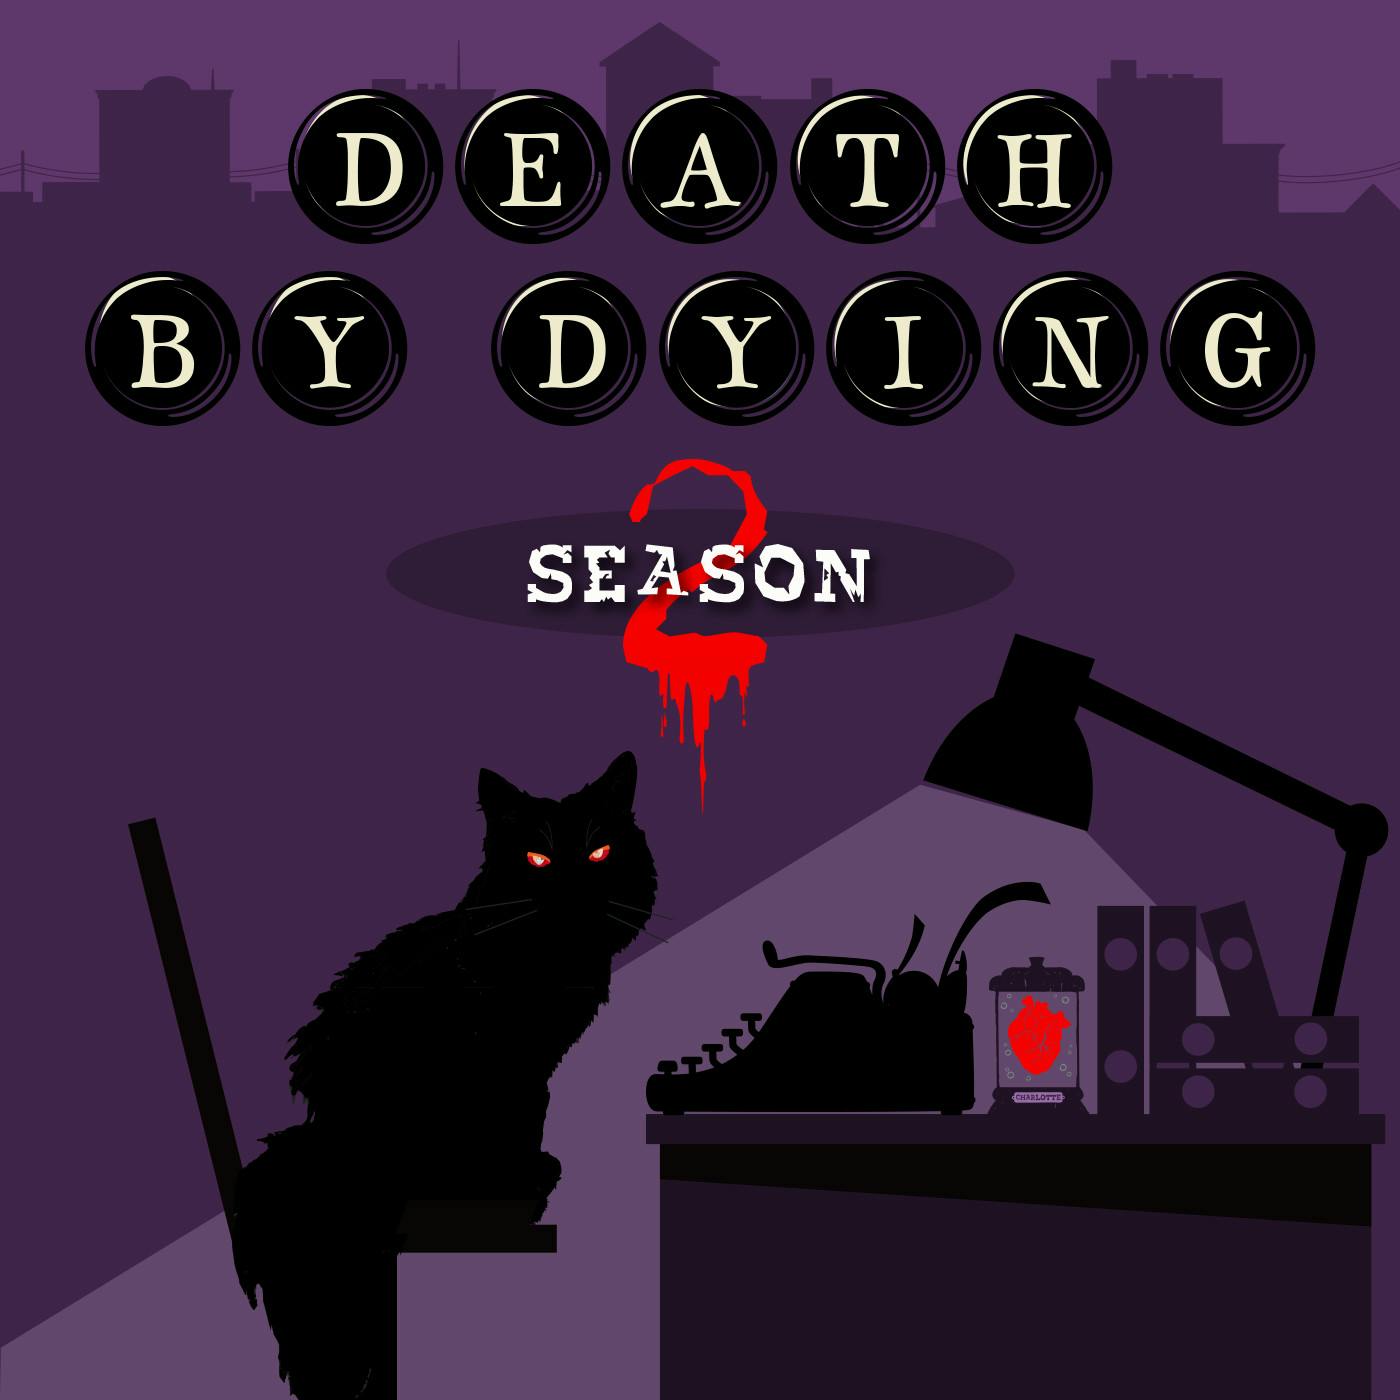 "Death by Dying" Podcast